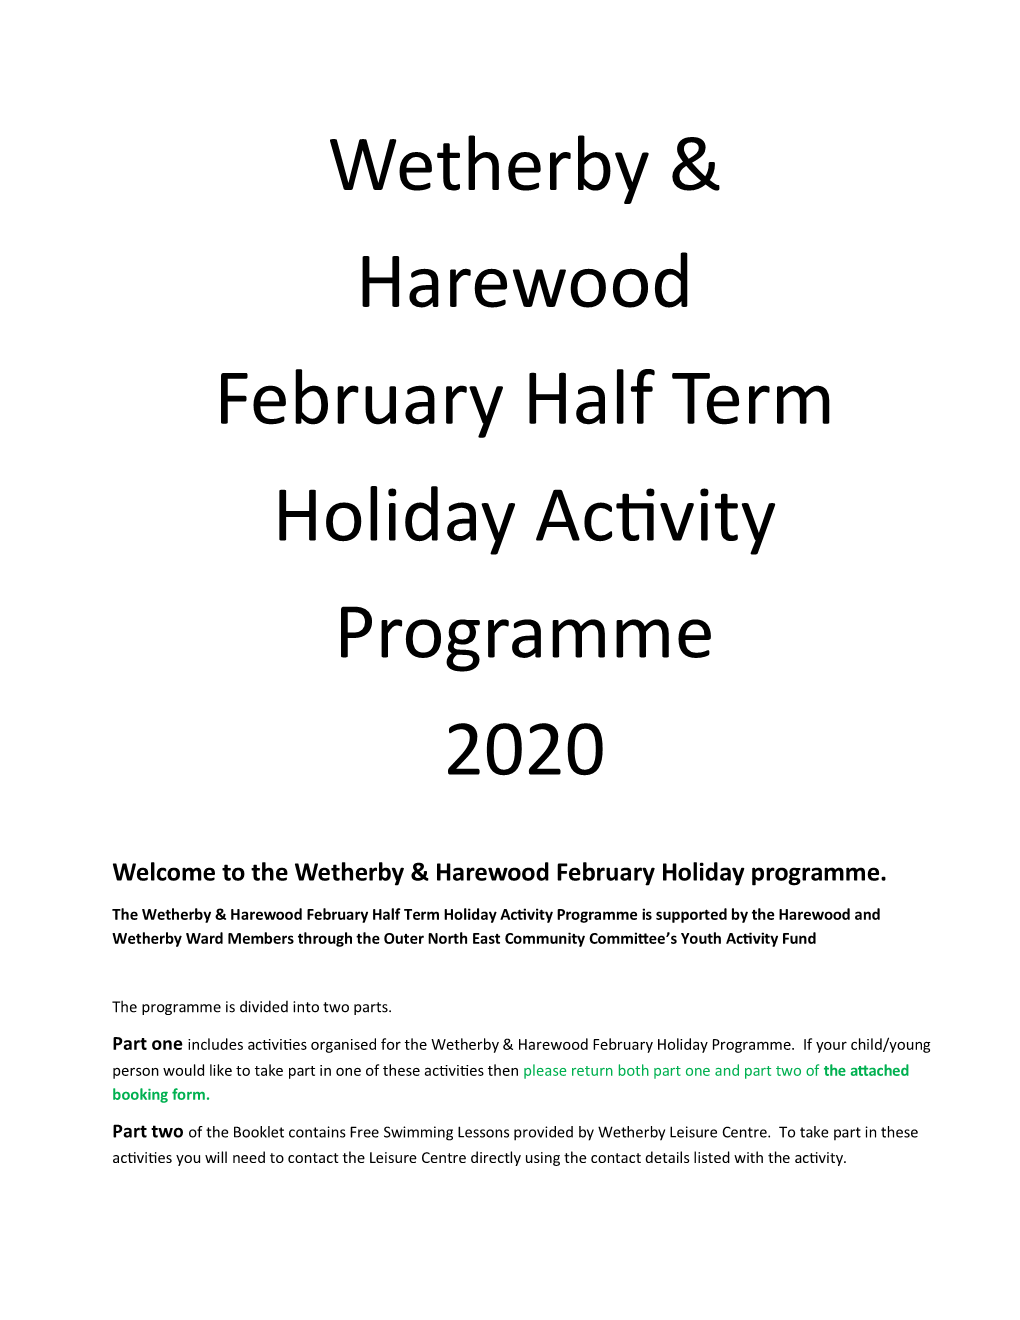 Wetherby & Harewood February Half Term Holiday Activity Programme